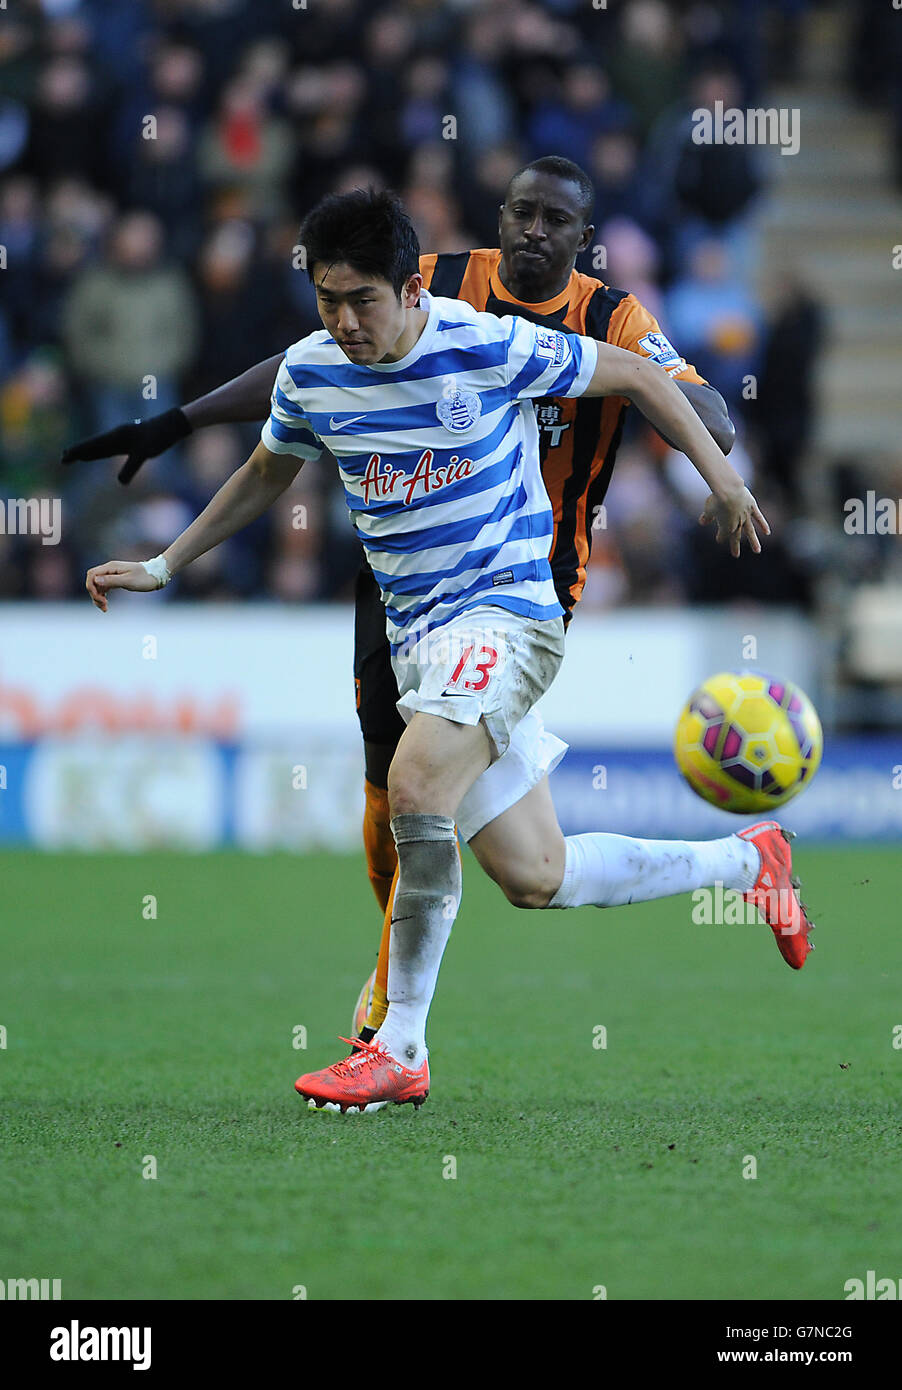 Soccer - Barclays Premier League - Hull City v Queens Park Rangers - KC Stadium. QPR's Yun Suk-Young and Hull City's Dame N'Doye in action during the Barclays Premier League match at the KC Stadium, Hull. Stock Photo